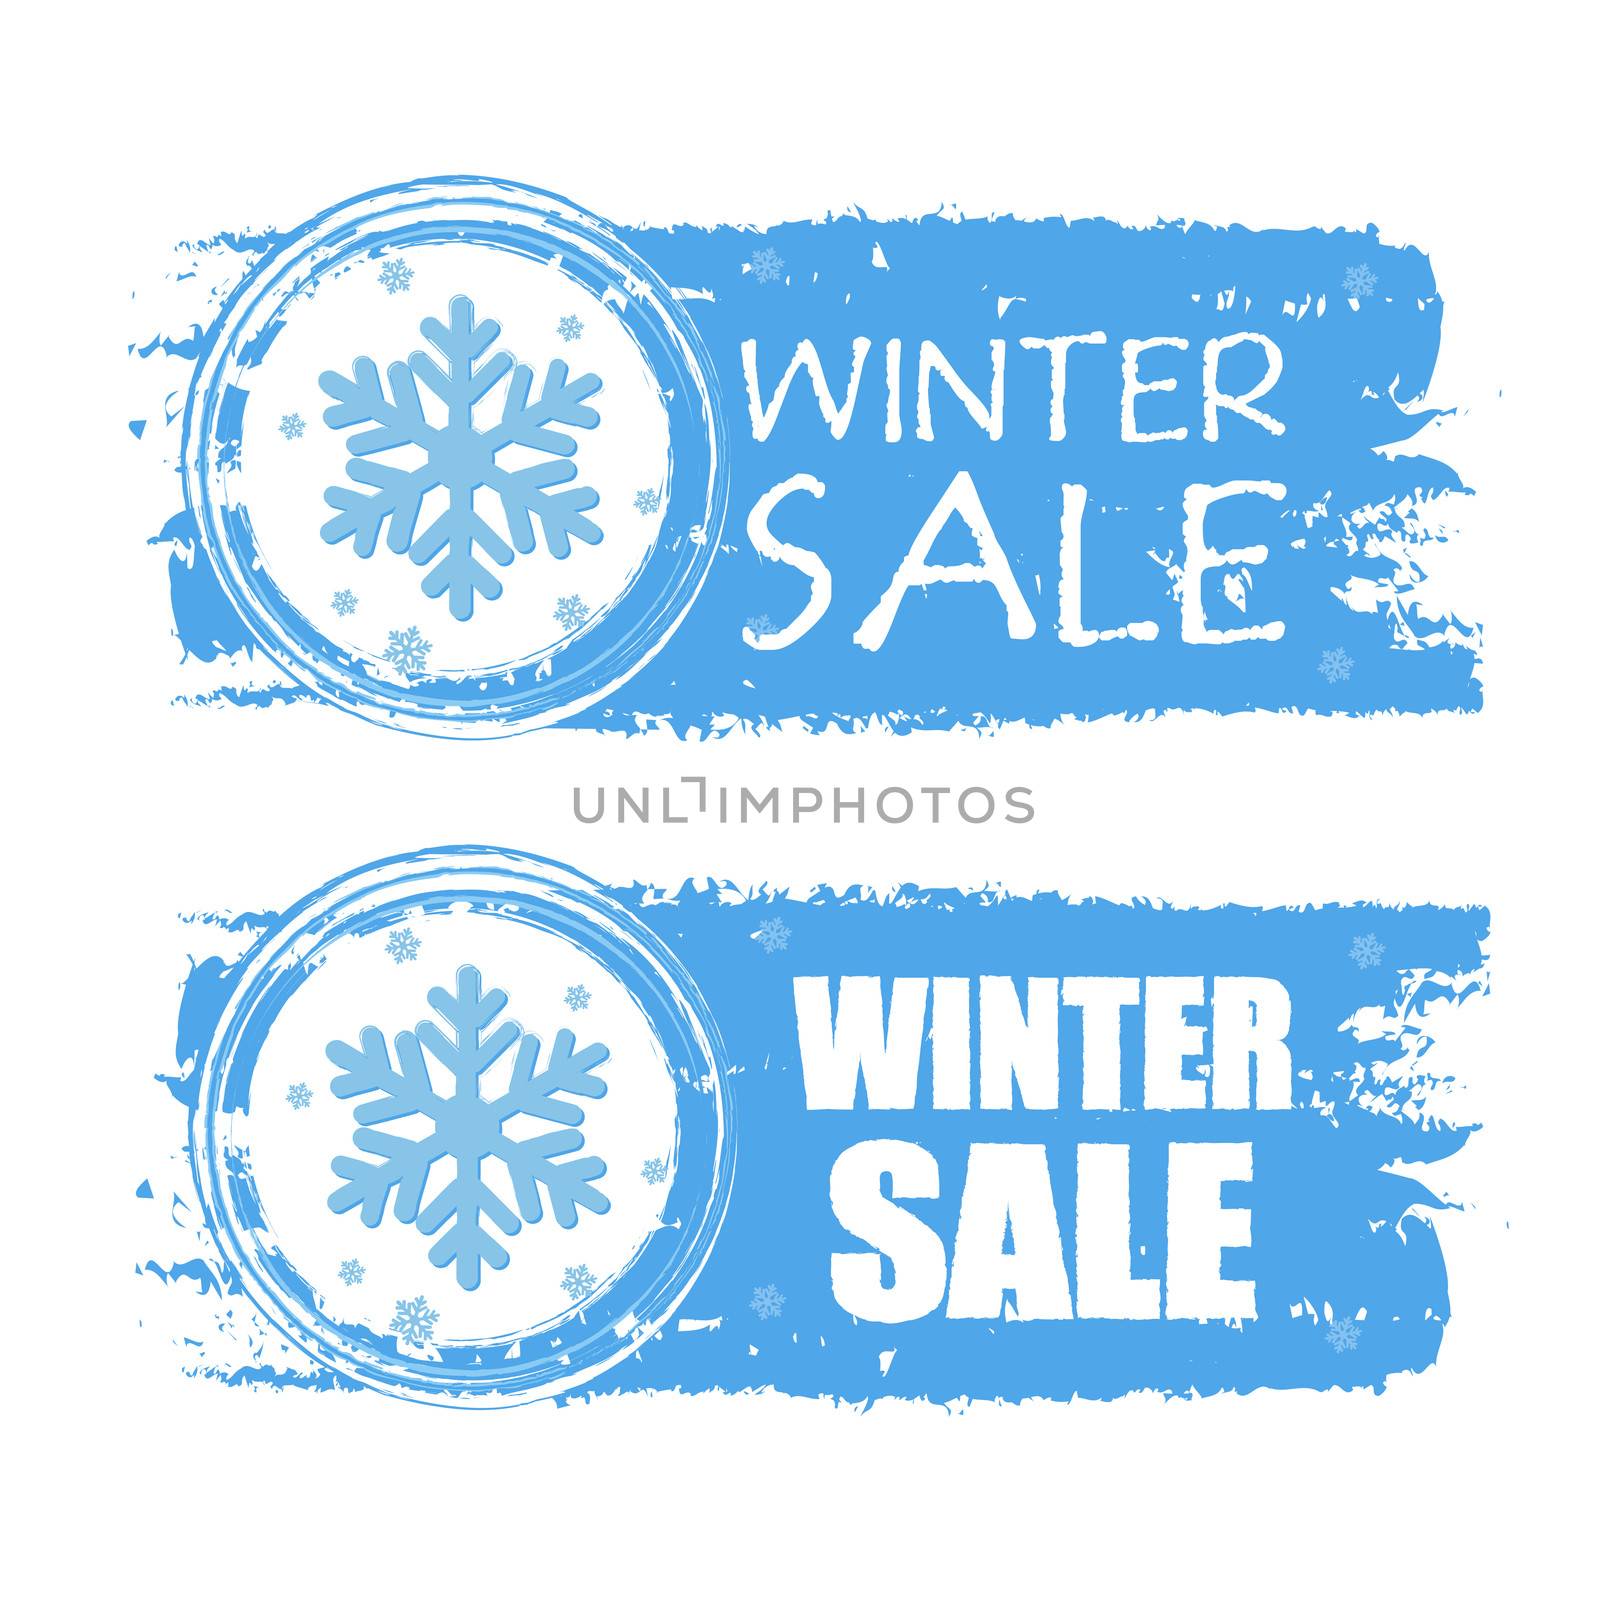 winter sale - text with snowflake sign on blue drawn banners, business seasonal concept